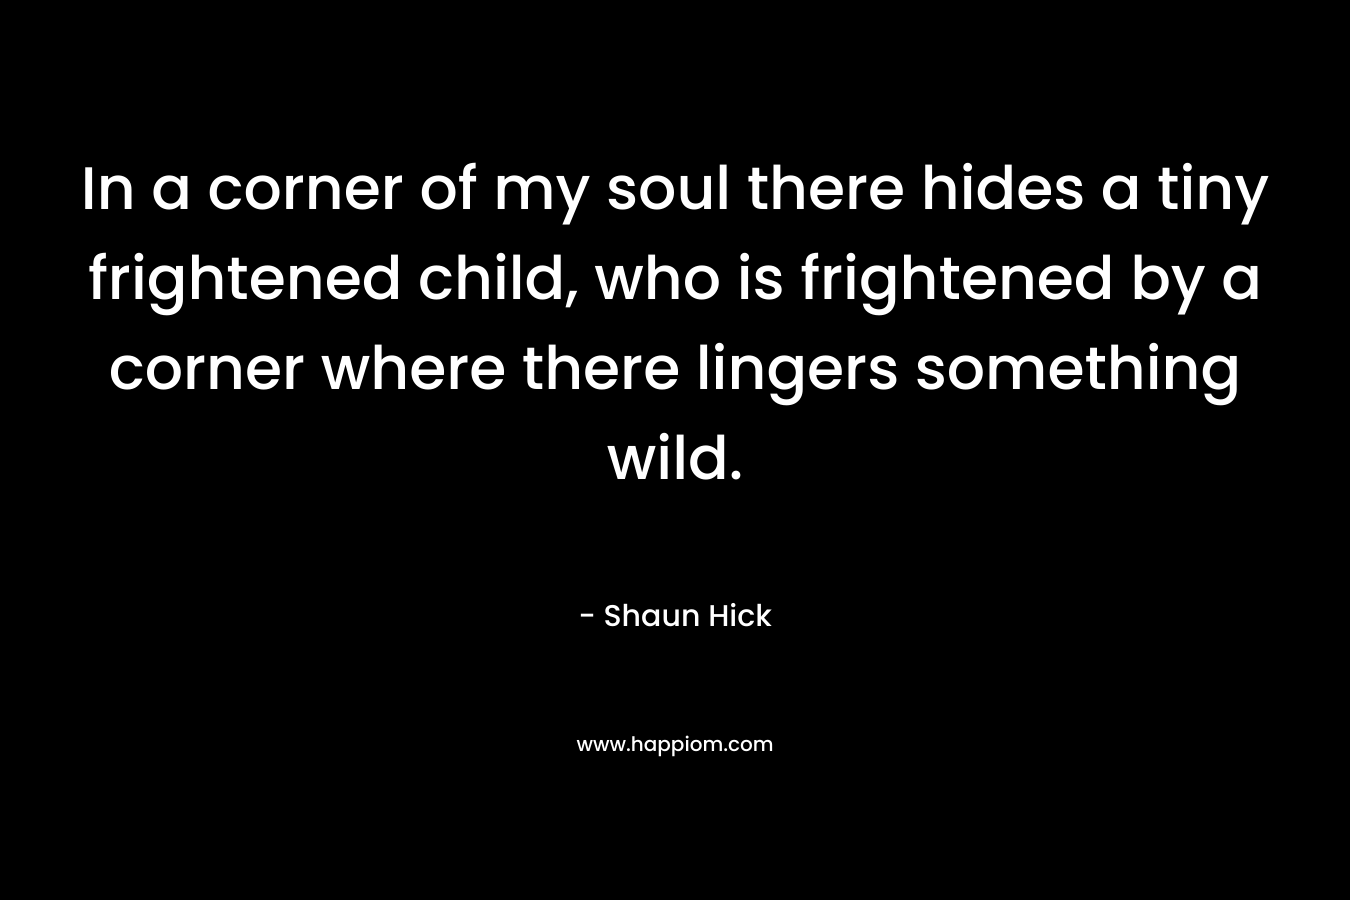 In a corner of my soul there hides a tiny frightened child, who is frightened by a corner where there lingers something wild.